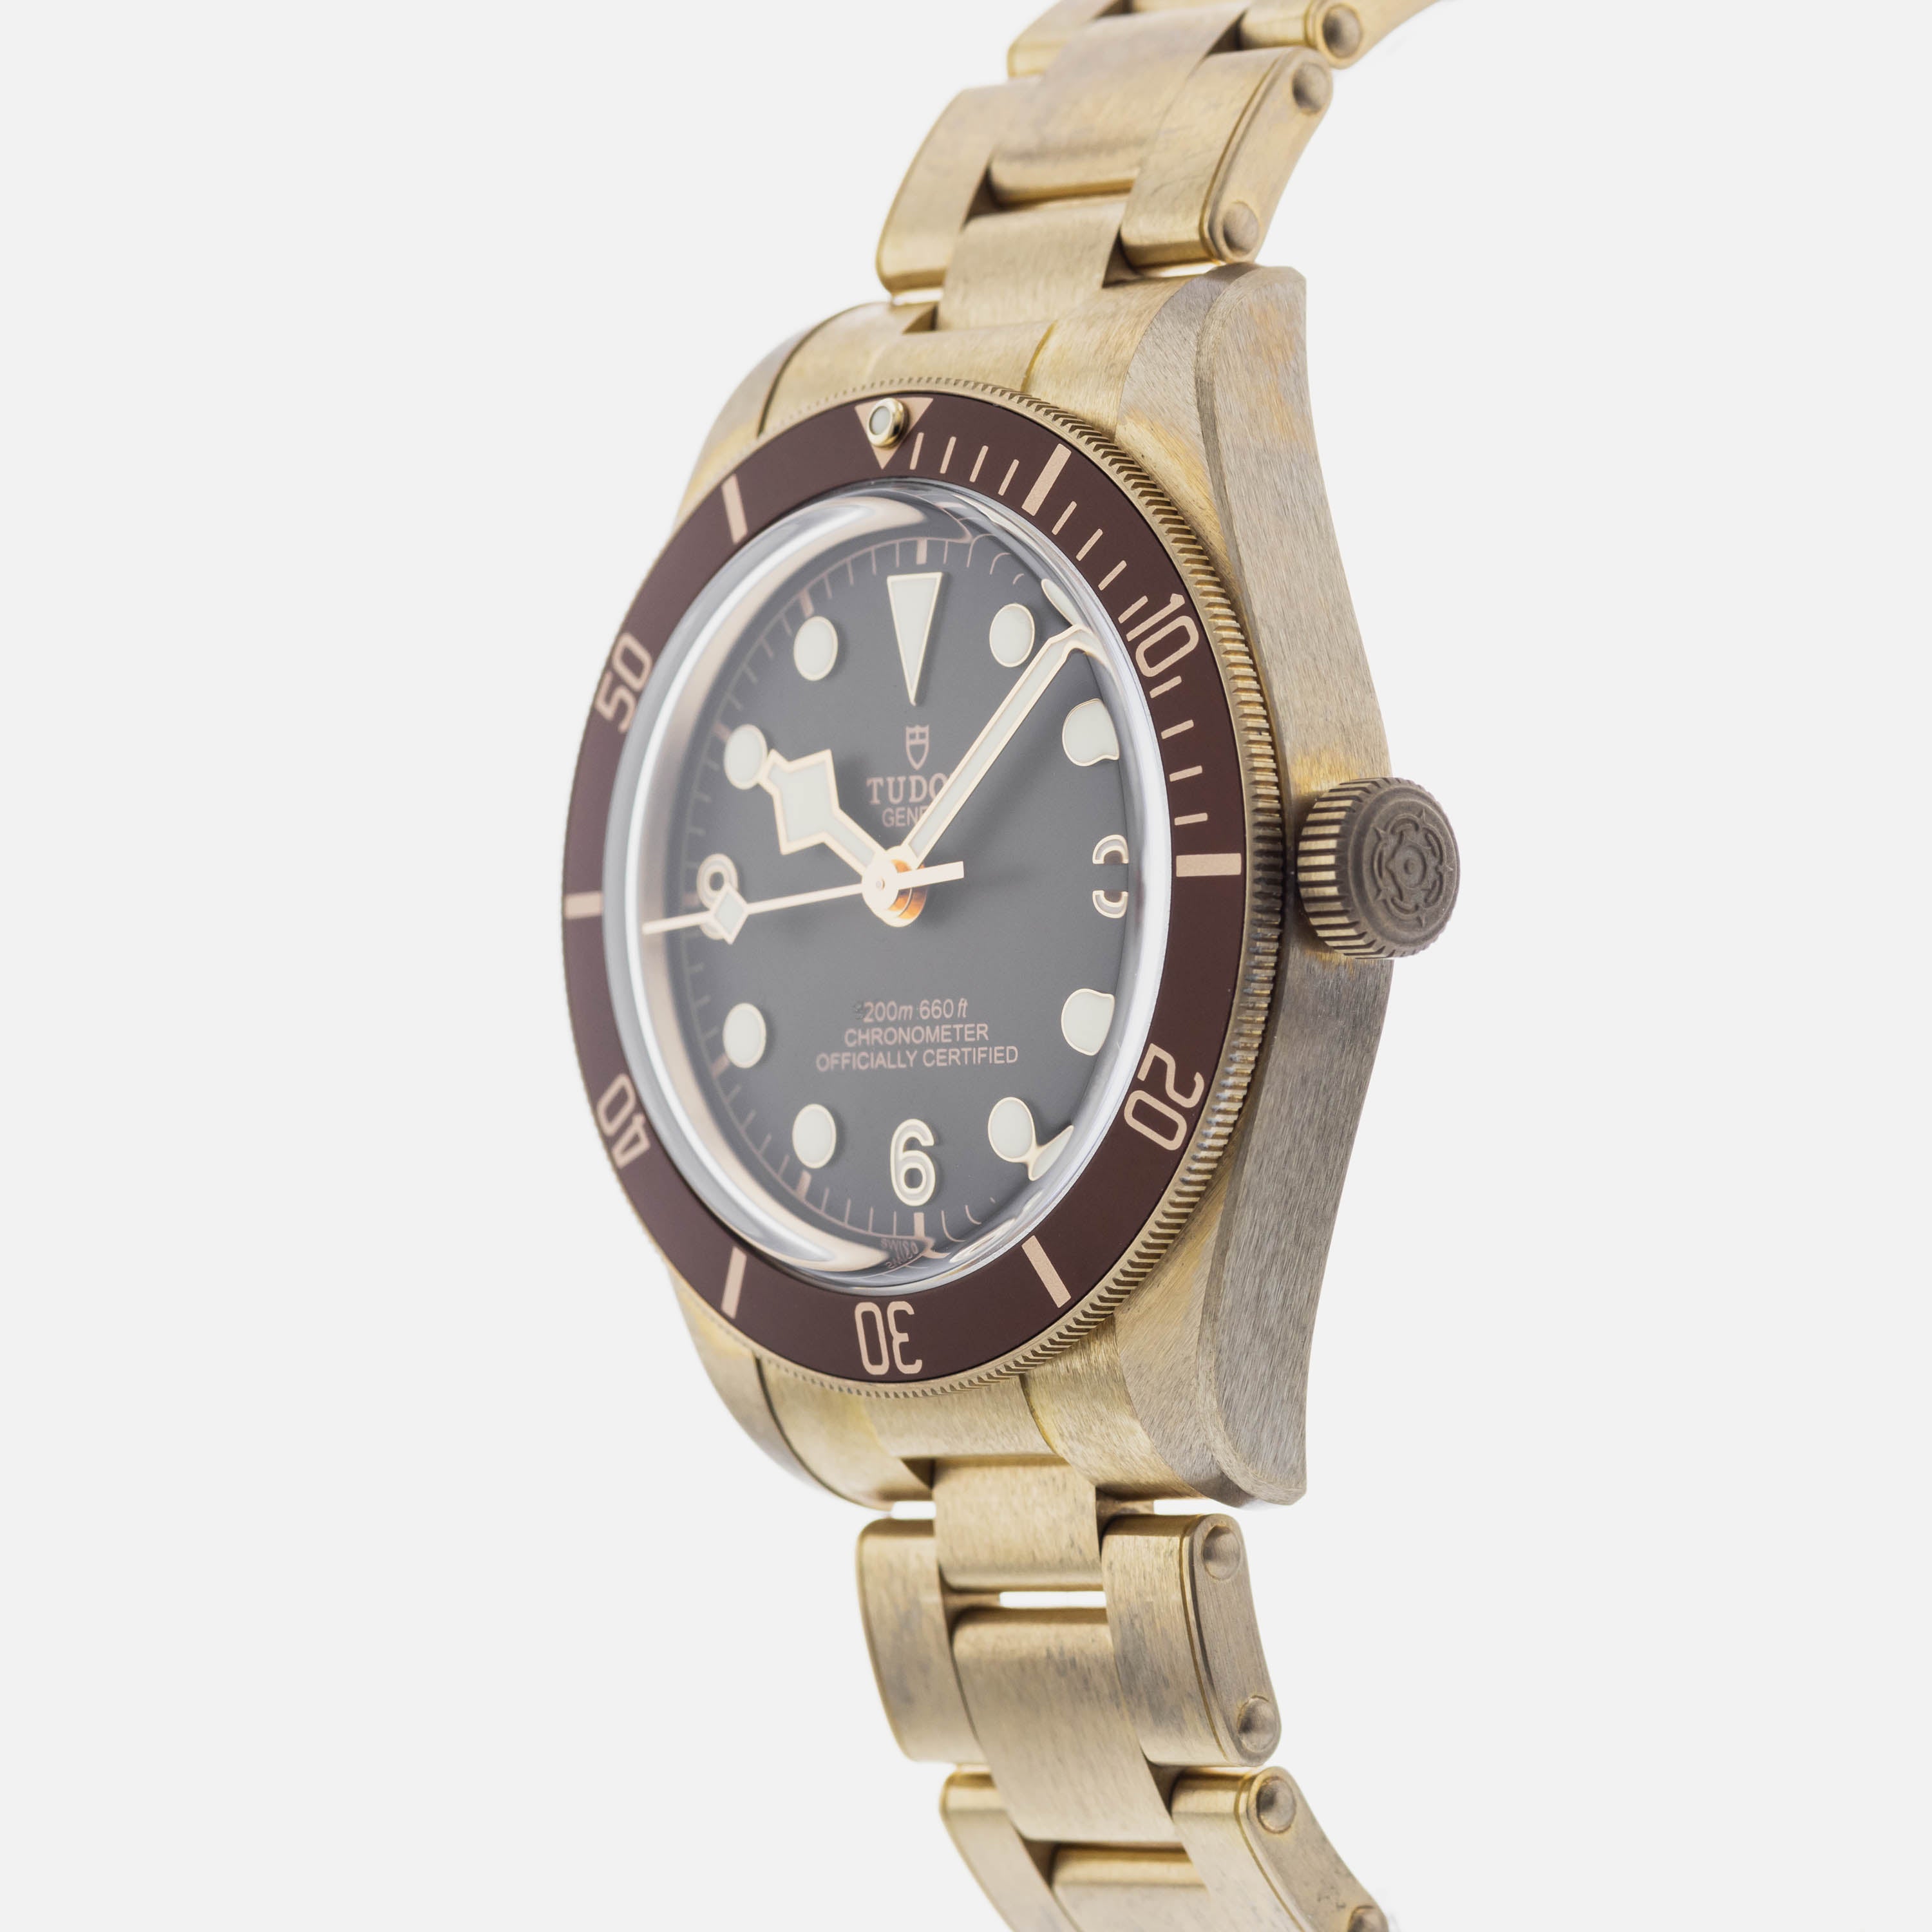 Tudor Heritage Black Bay Fifty-Eight Boutique Exclusive 79012